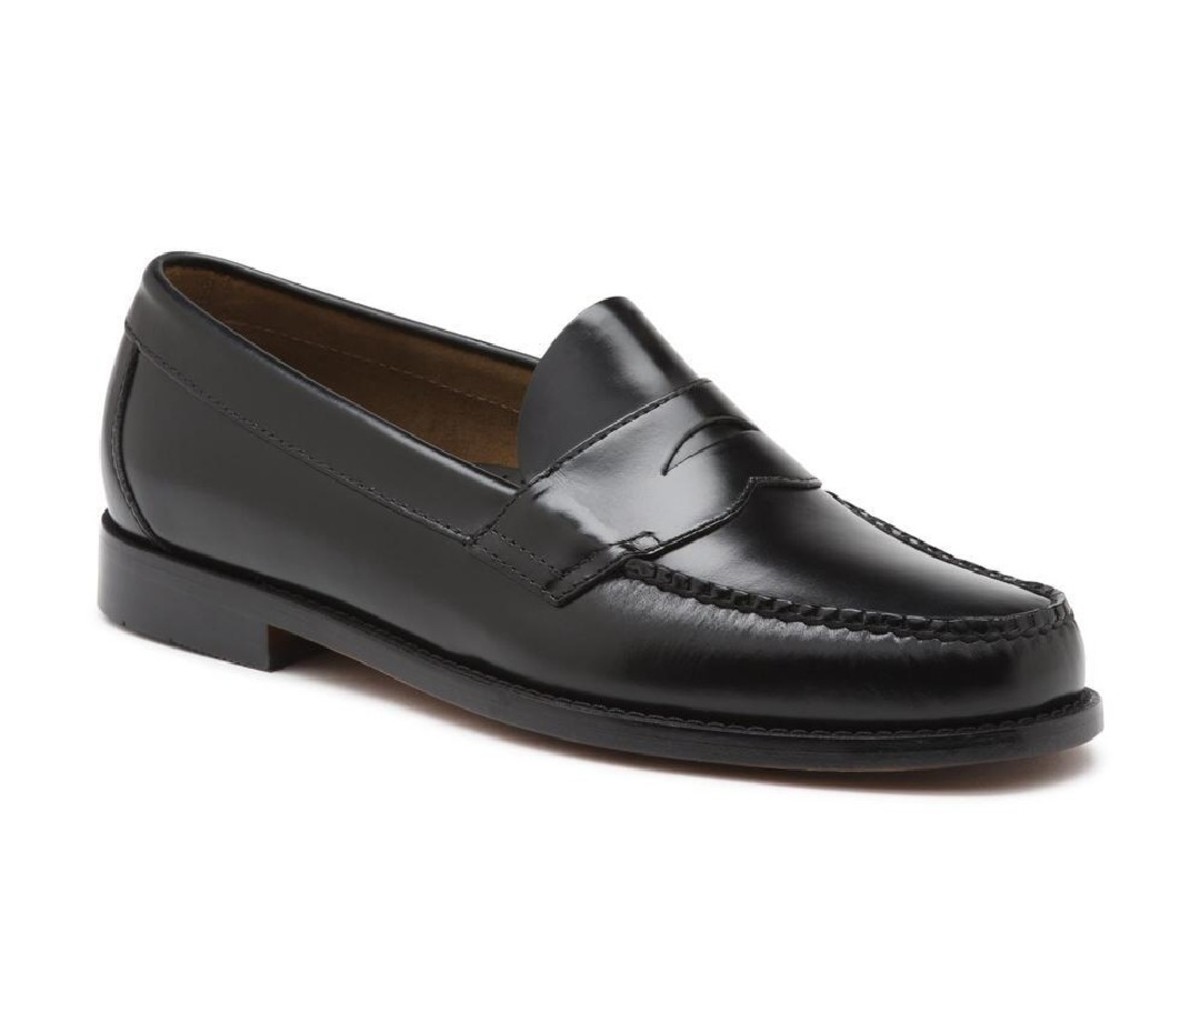 A G.H. Bass & Co. Logan Flat Strap Weejuns loafer